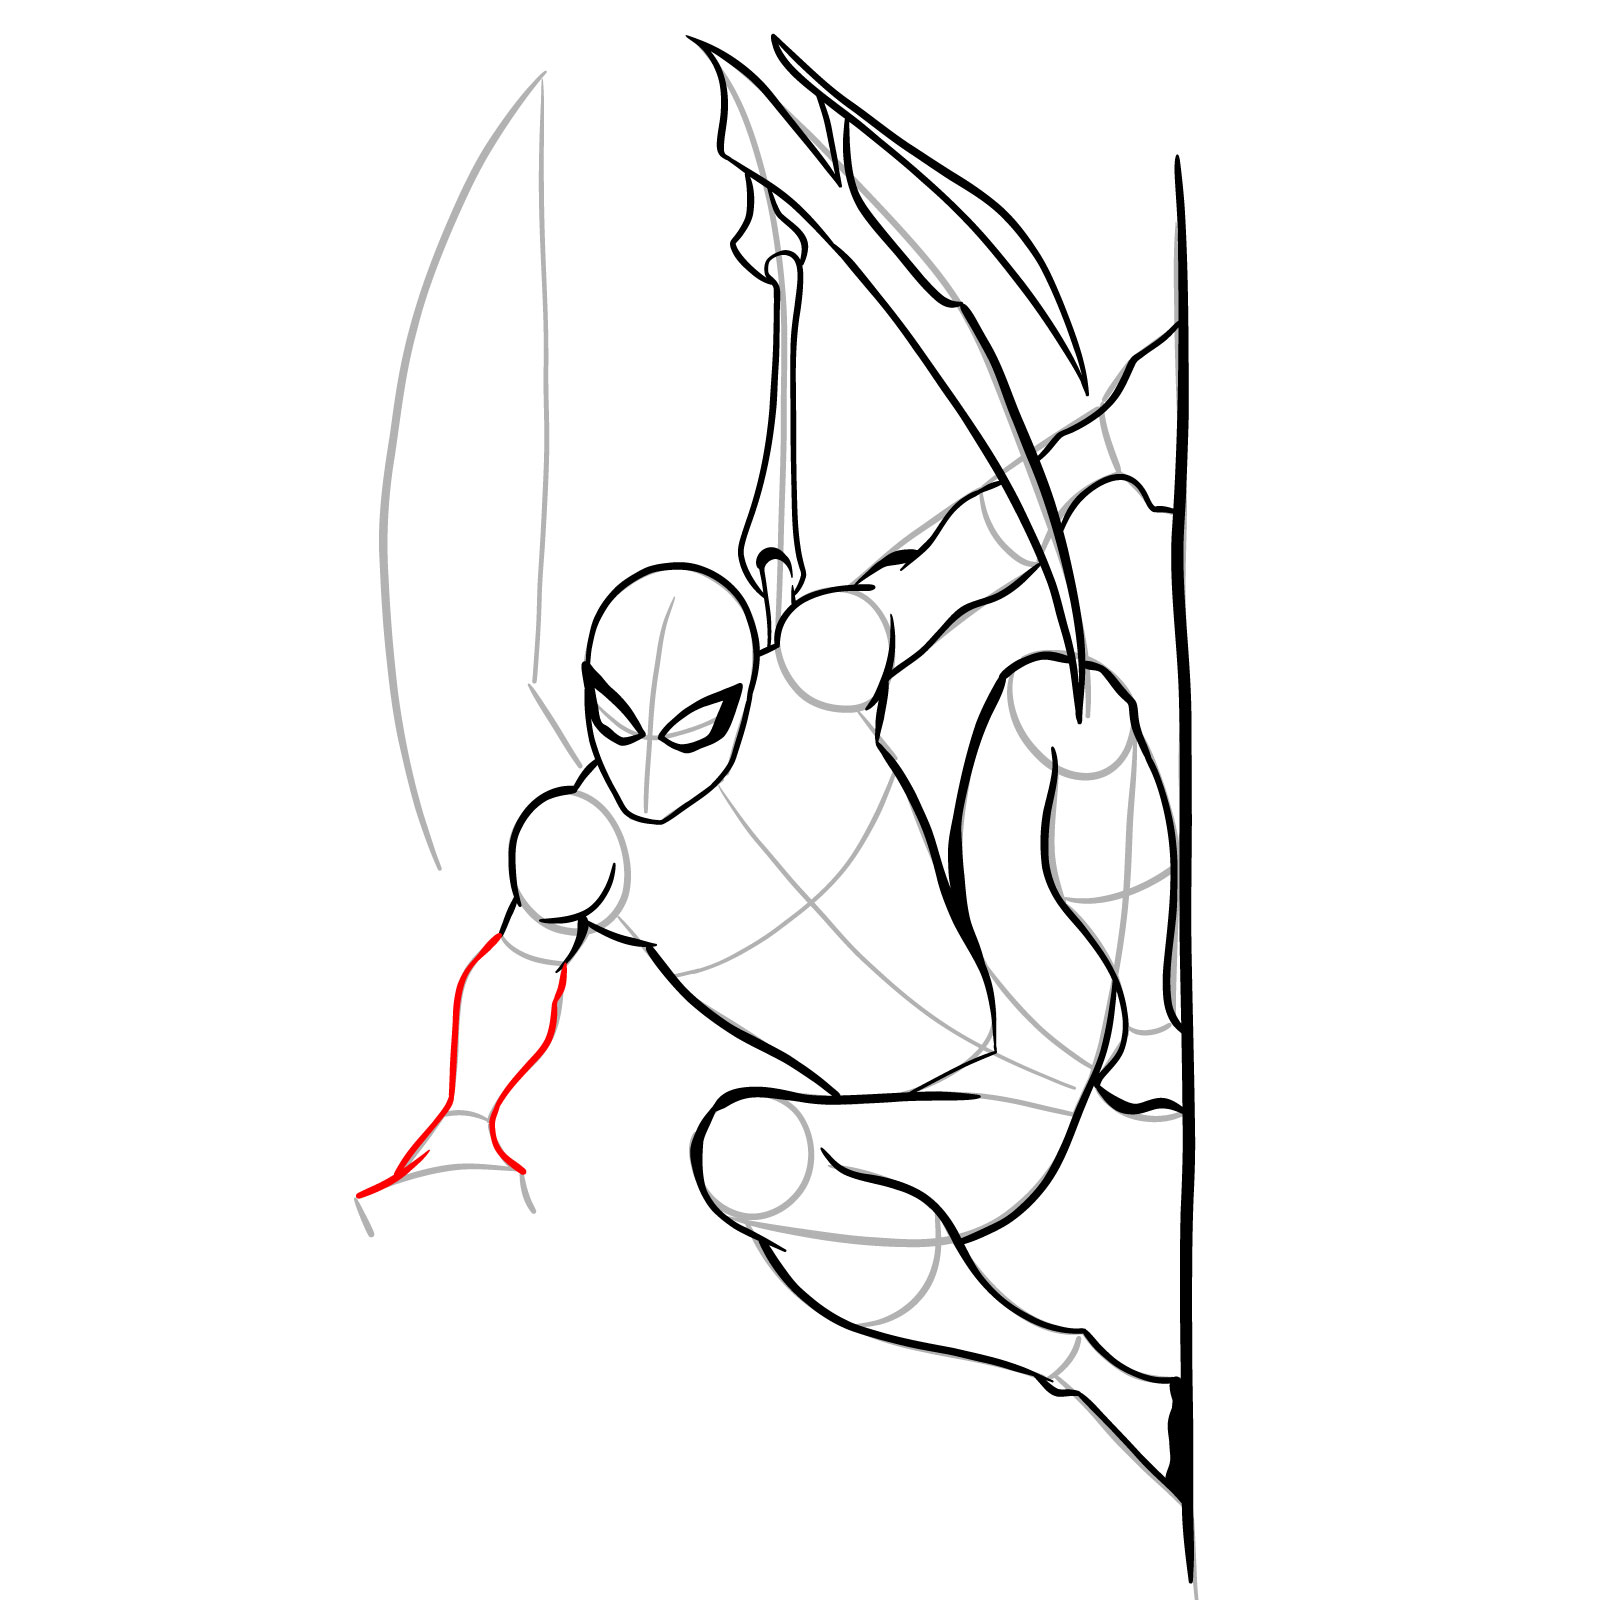 How to draw The Superior Spider-Man - step 23